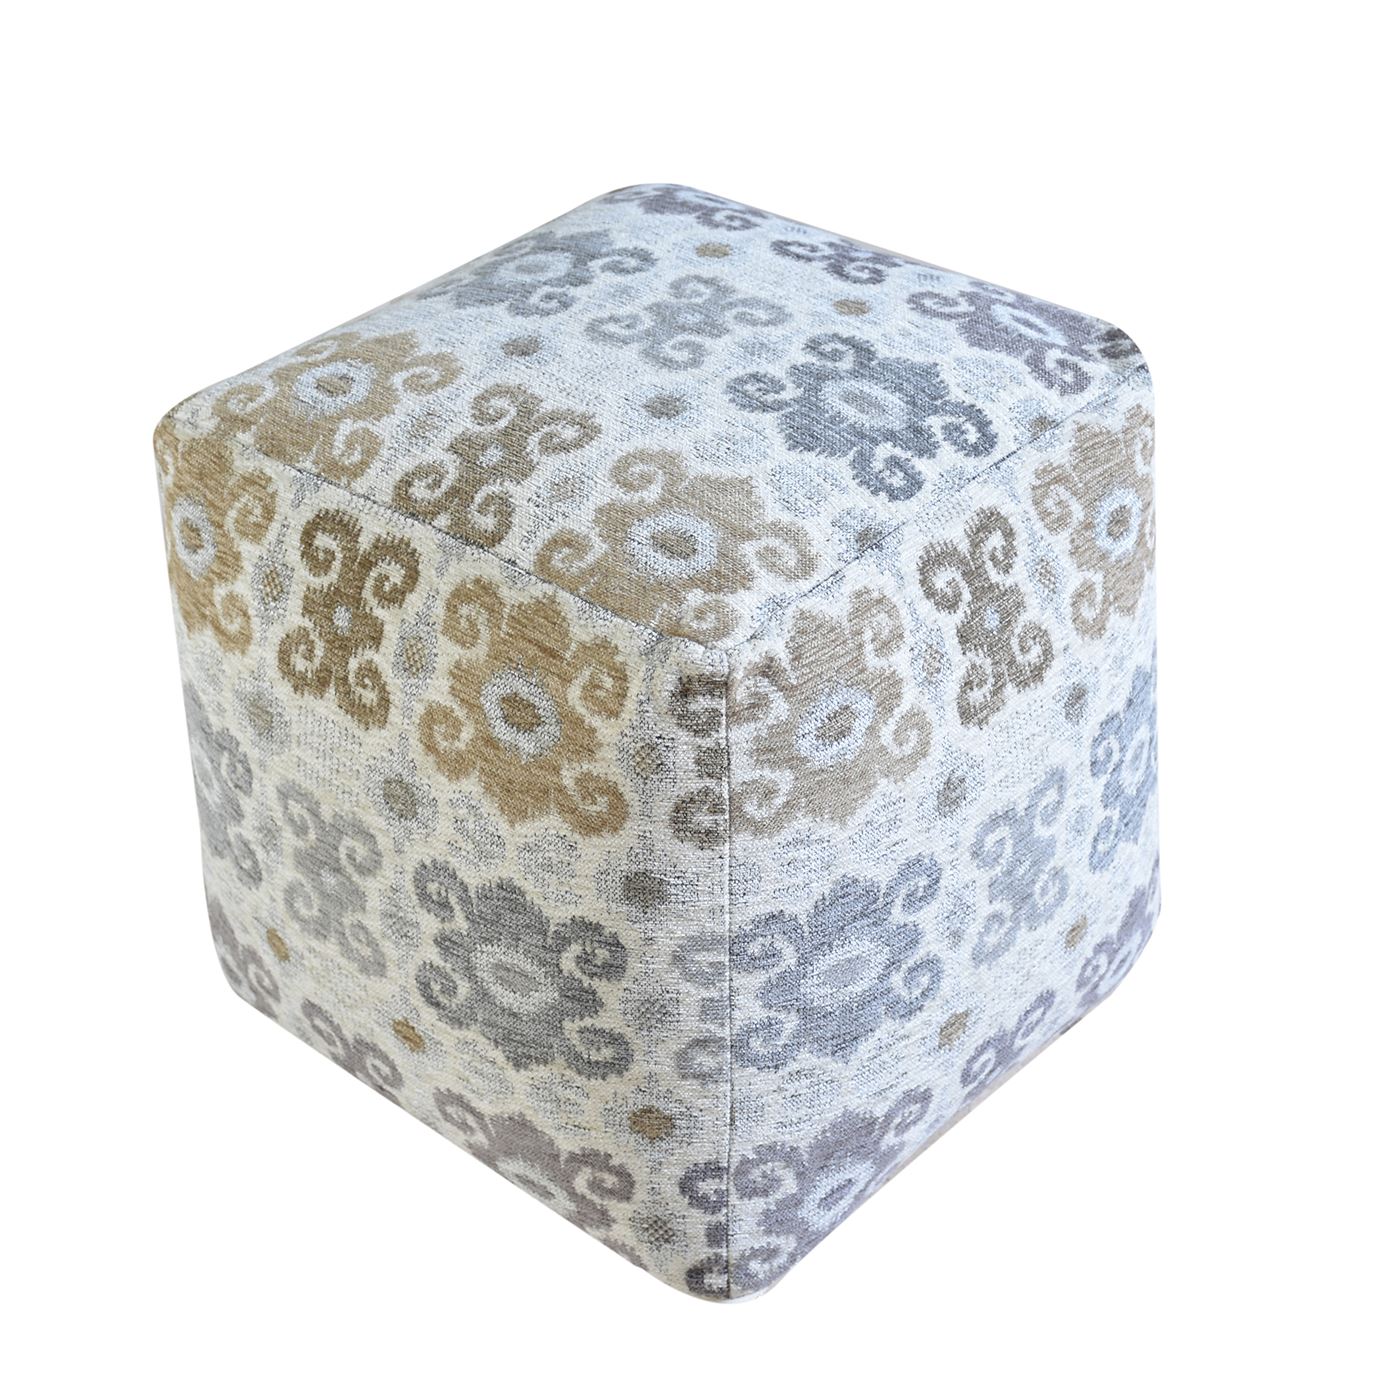 Zornis Pouf, Acrylic/ Polyester, Grey/ Natural, Jaquard Durry, Flat Weave 